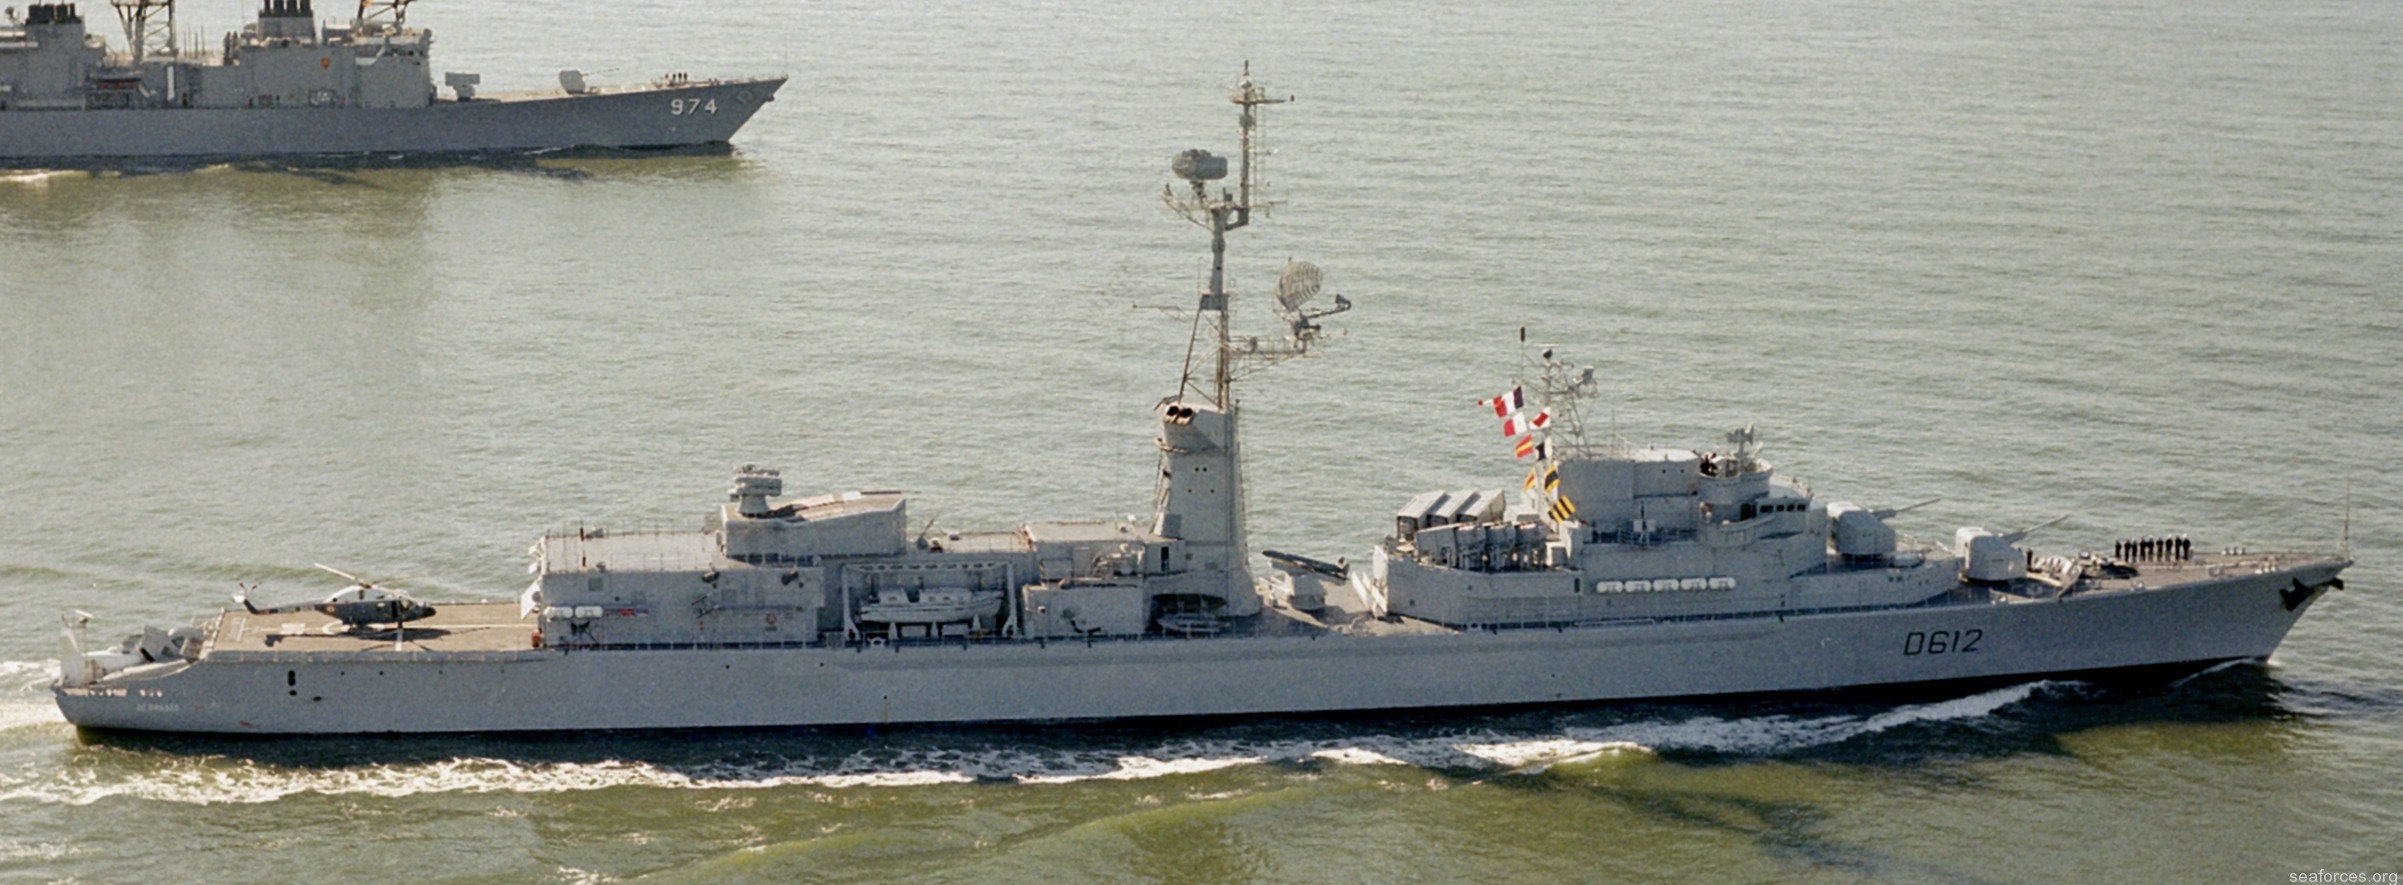 tourville class type f67 asw frigate destroyer french navy marine nationale 07 d-612 de grasse